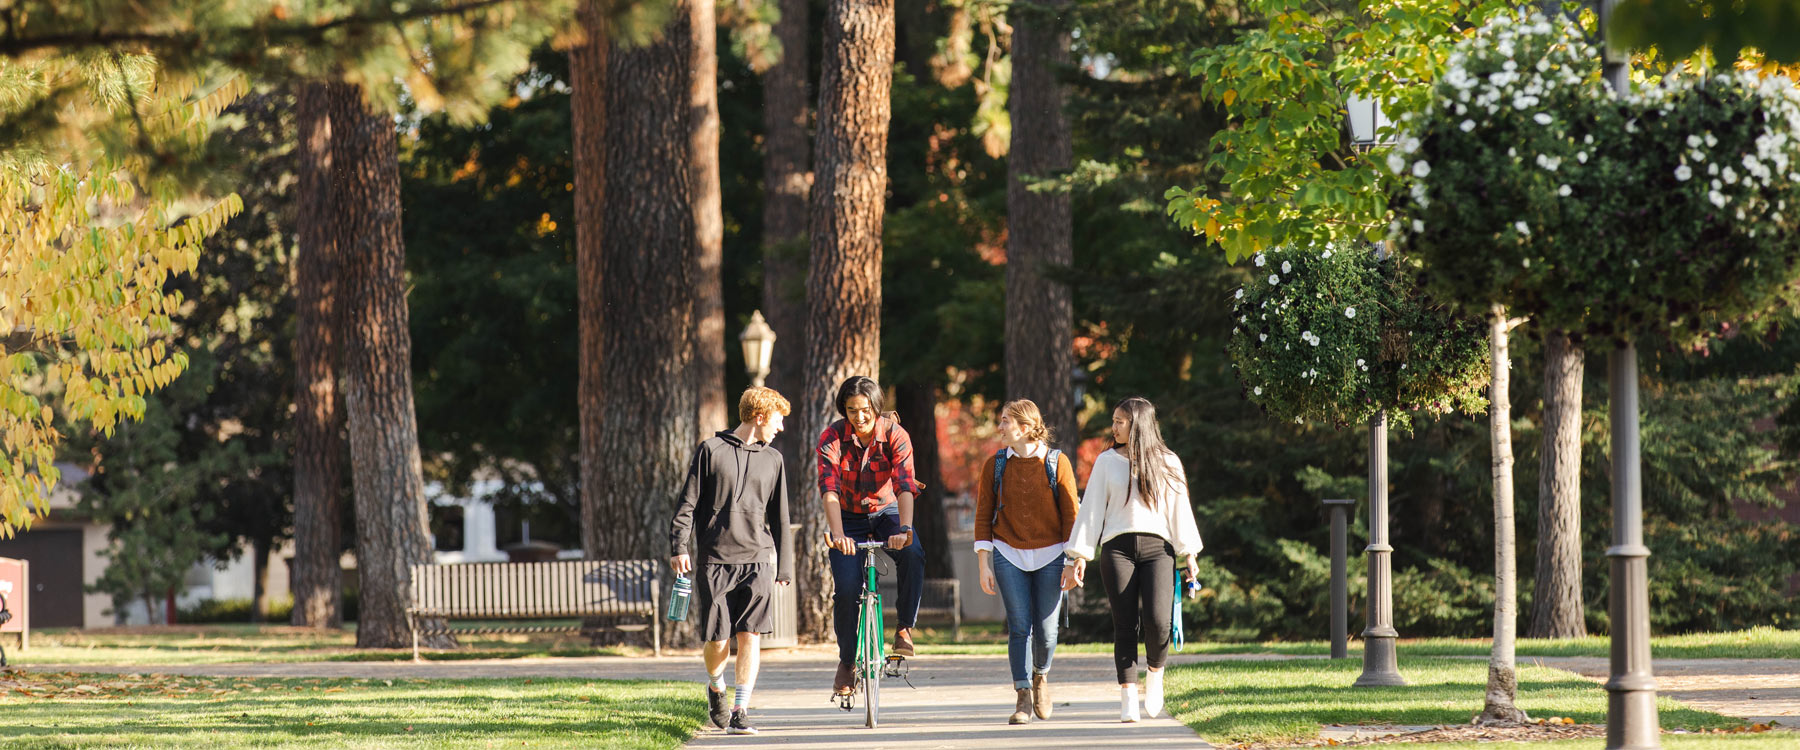 Students walk on campus at Whitworth. Evergreen trees in the background